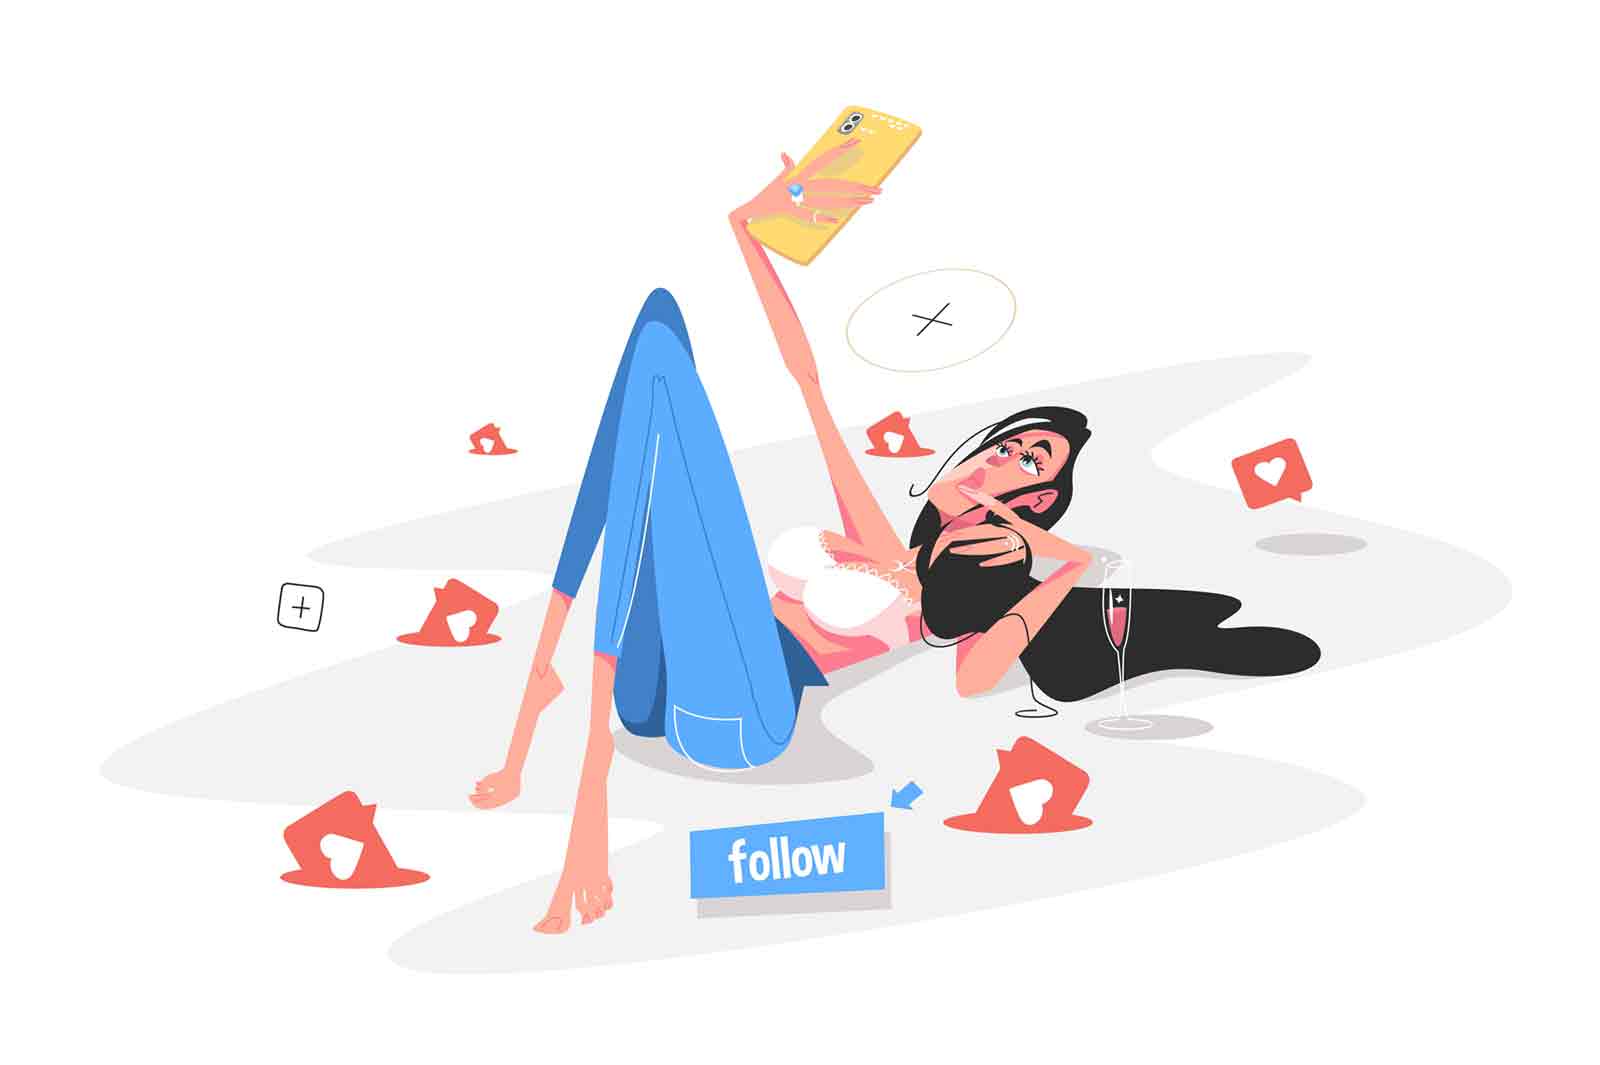 Woman taking selfie to post in social network vector illustration. Woman taking selfie and posting to social media flat style concept. Likes and followers signs. Virtual life idea